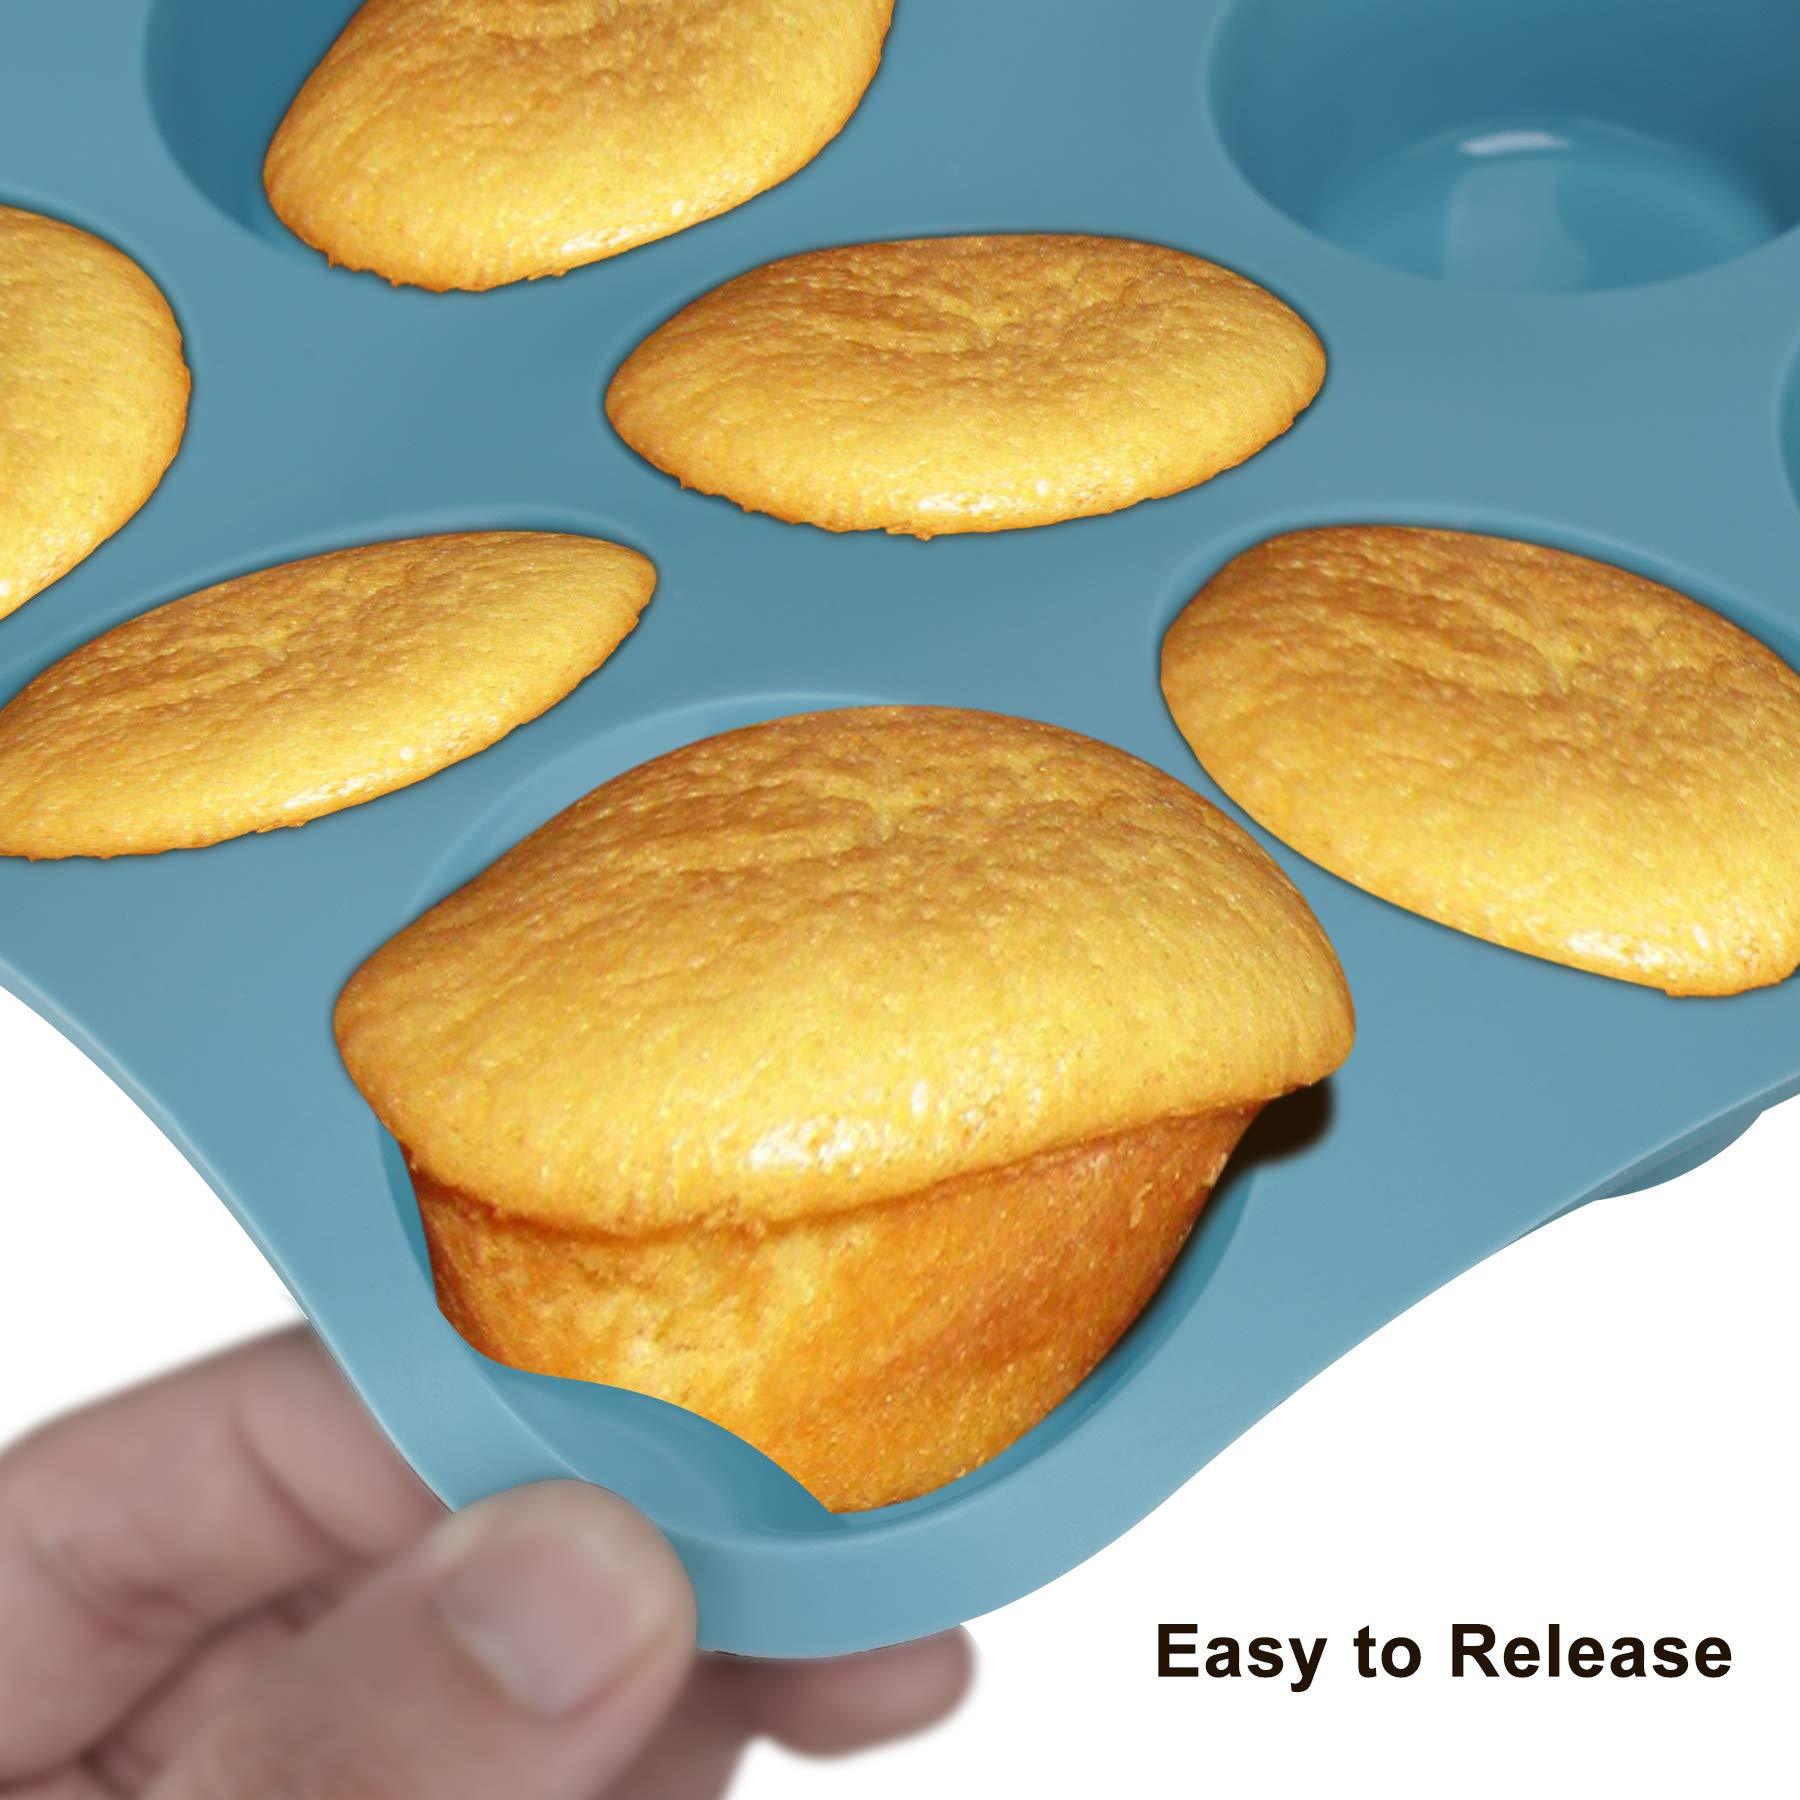 Economical 7in1 Nonstick Silicone Baking Cake Pan Cookie Sheet Molds Tray Set for Oven, BPA Free Heat Resistant Bakeware Suppliers Tools Kit for Muffin Loaf Bread Pizza Cheesecake Cupcake Pie Utensil - CookCave